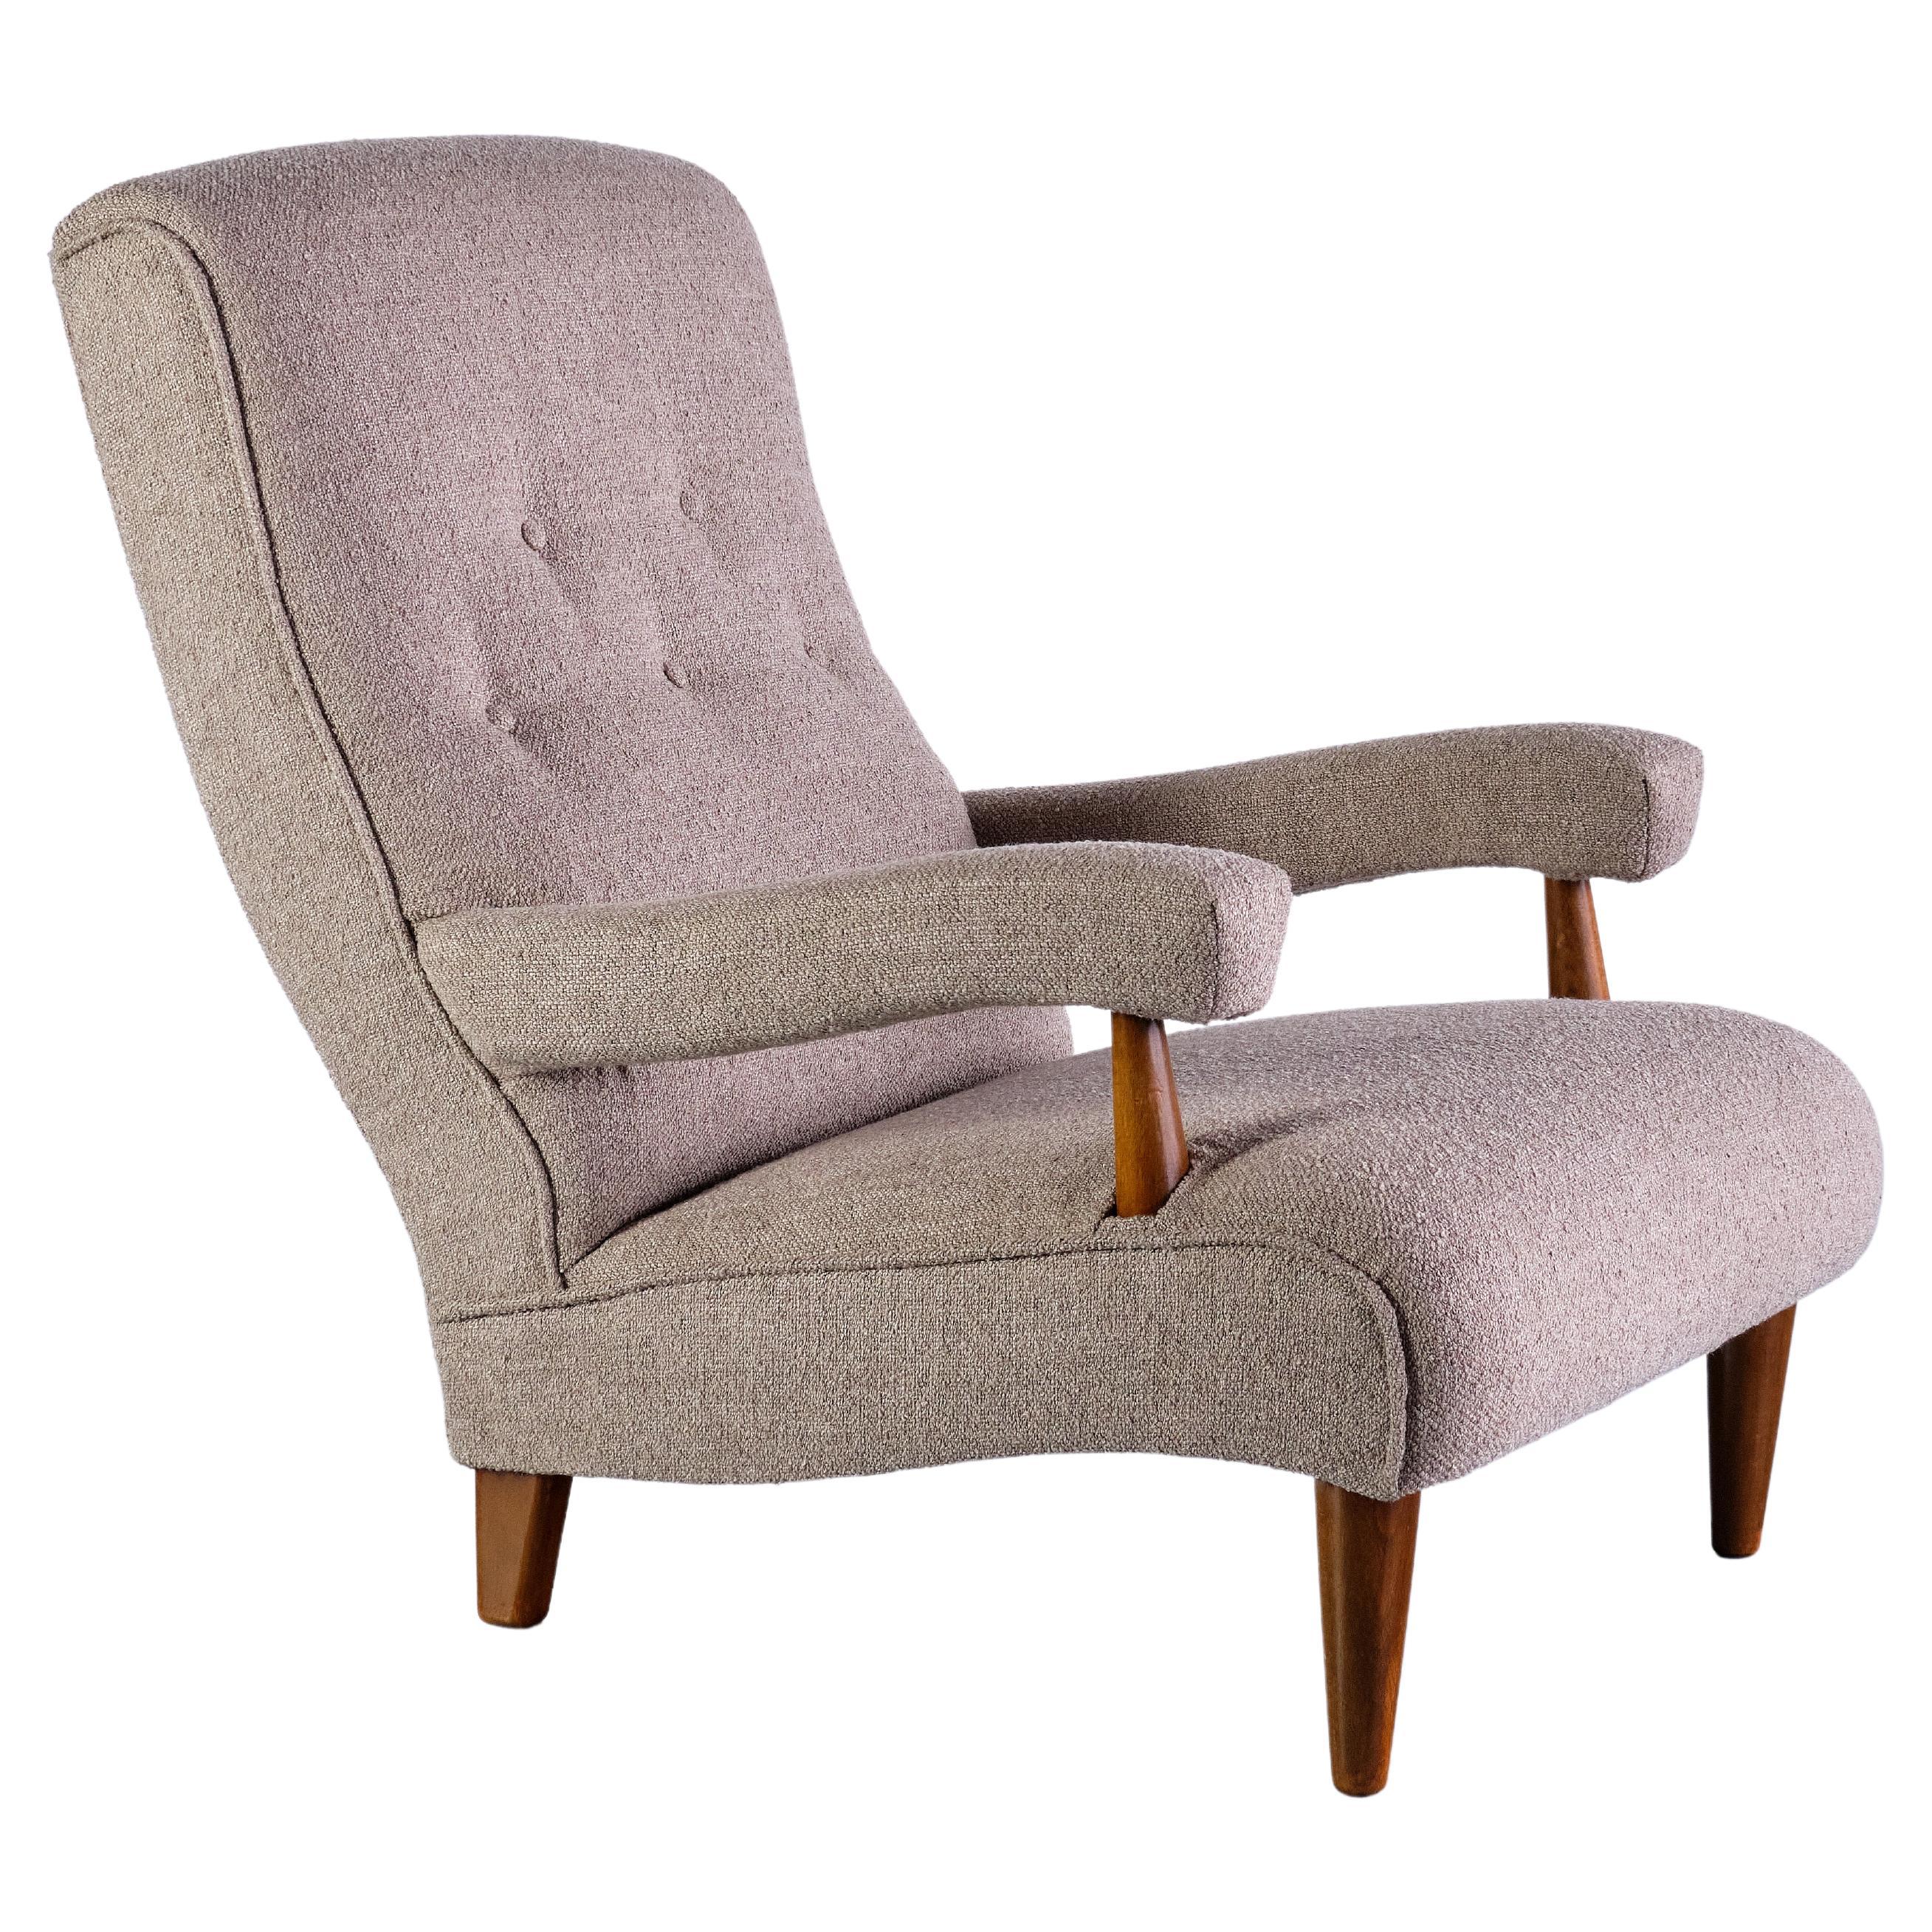 Tage Westberg Armchair in Bouclé and Beech Wood, Sweden, 1960s For Sale